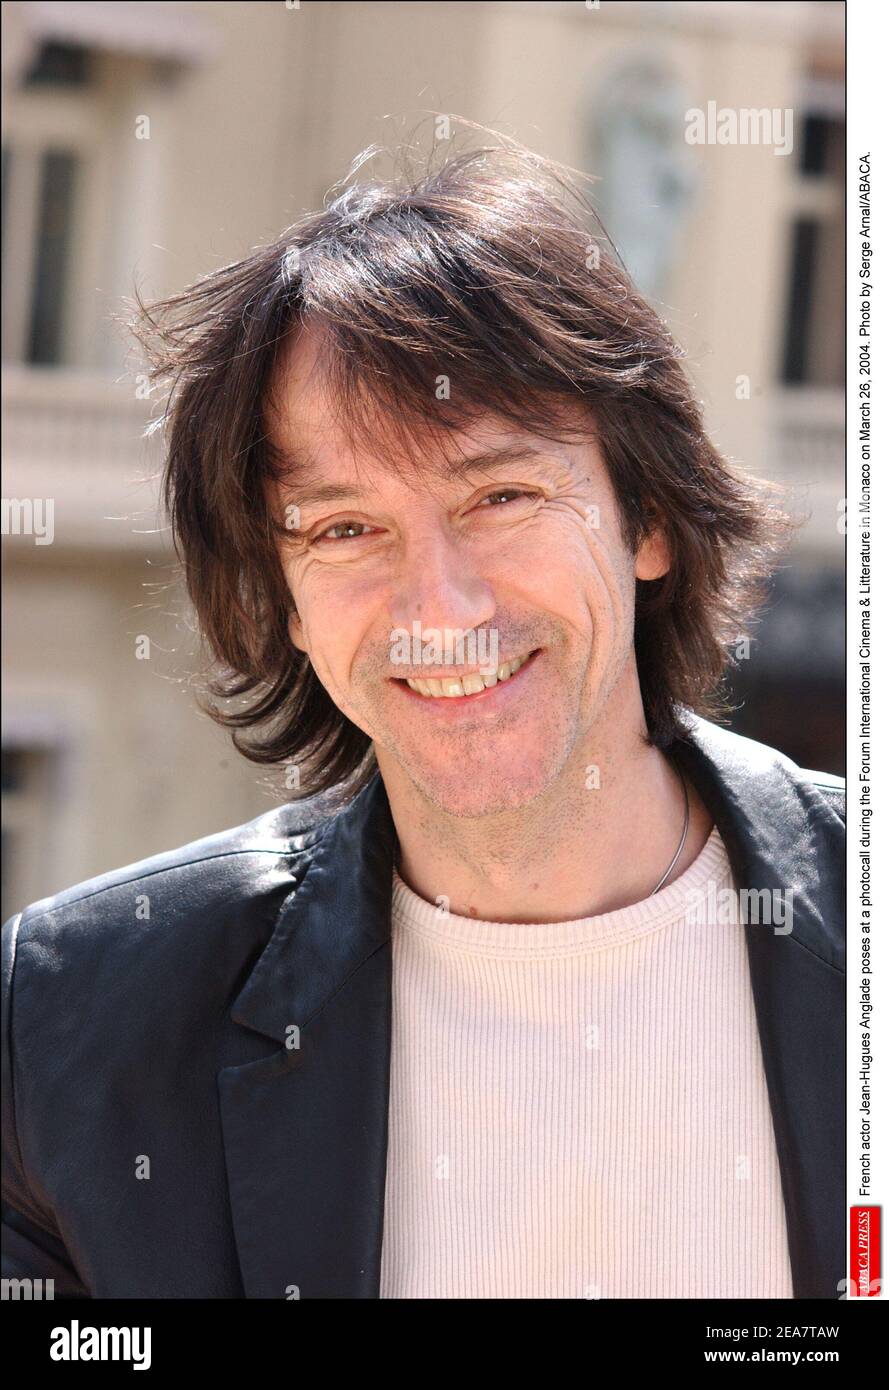 French actor Jean-Hugues Anglade poses at a photocall during the Forum  International Cinema & Literature in Monaco on March 26, 2004. Photo by  Serge Arnal/ABACA Stock Photo - Alamy